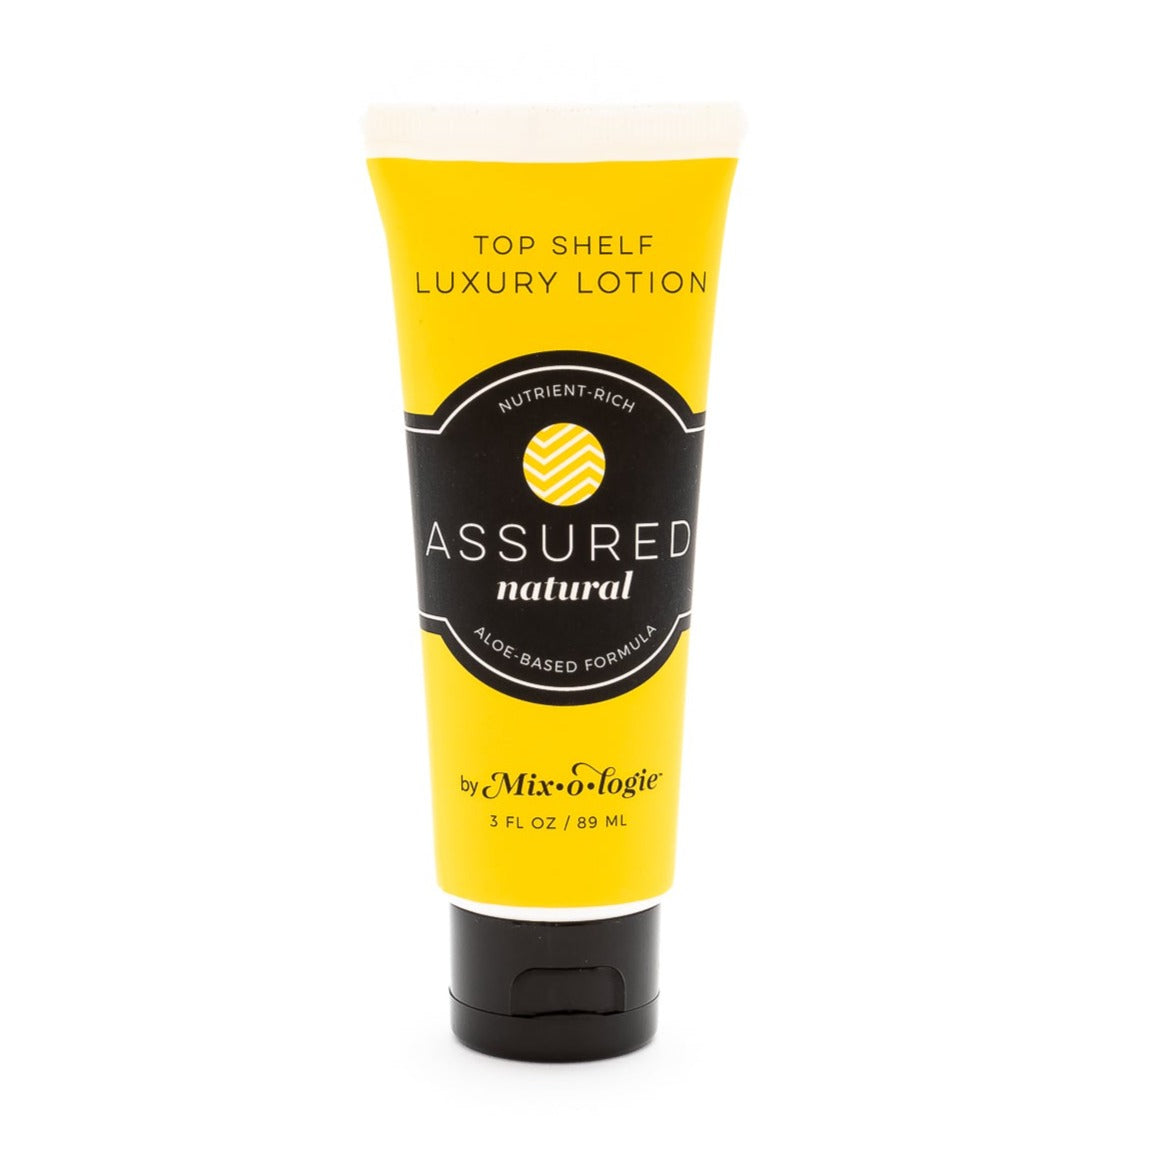 Assured (Natural) Top Shelf Lotion in mustard tube with black lid and label. Nutrient rich, aloe-based formula, tube has 5 fl oz or 89 mL. Pictured with white background.